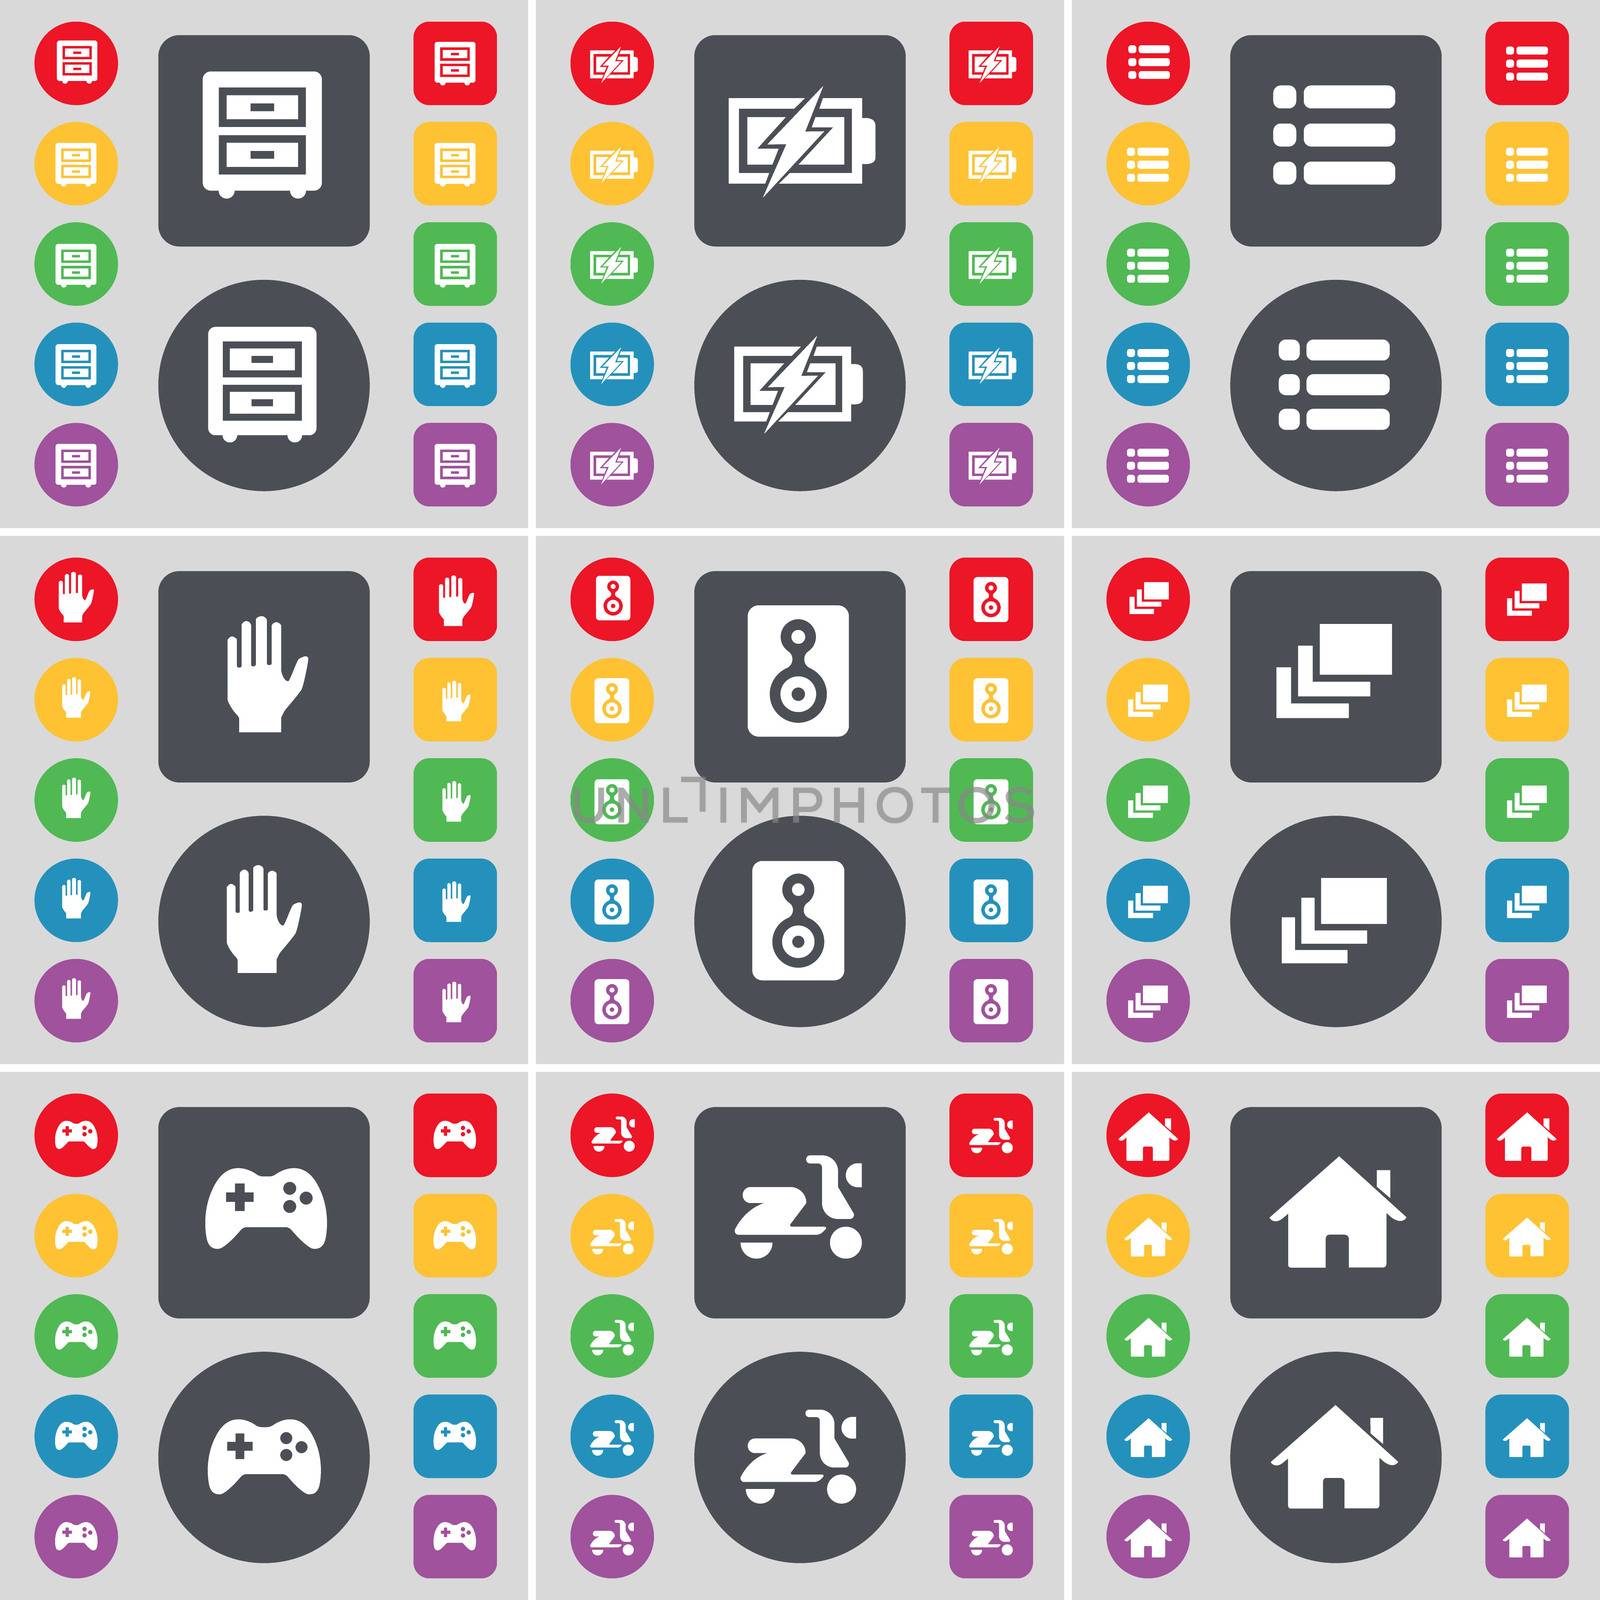 Bed-table, Charging, List, Hand, Speaker, Gallery, Gamepad, Scooter, House icon symbol. A large set of flat, colored buttons for your design. illustration